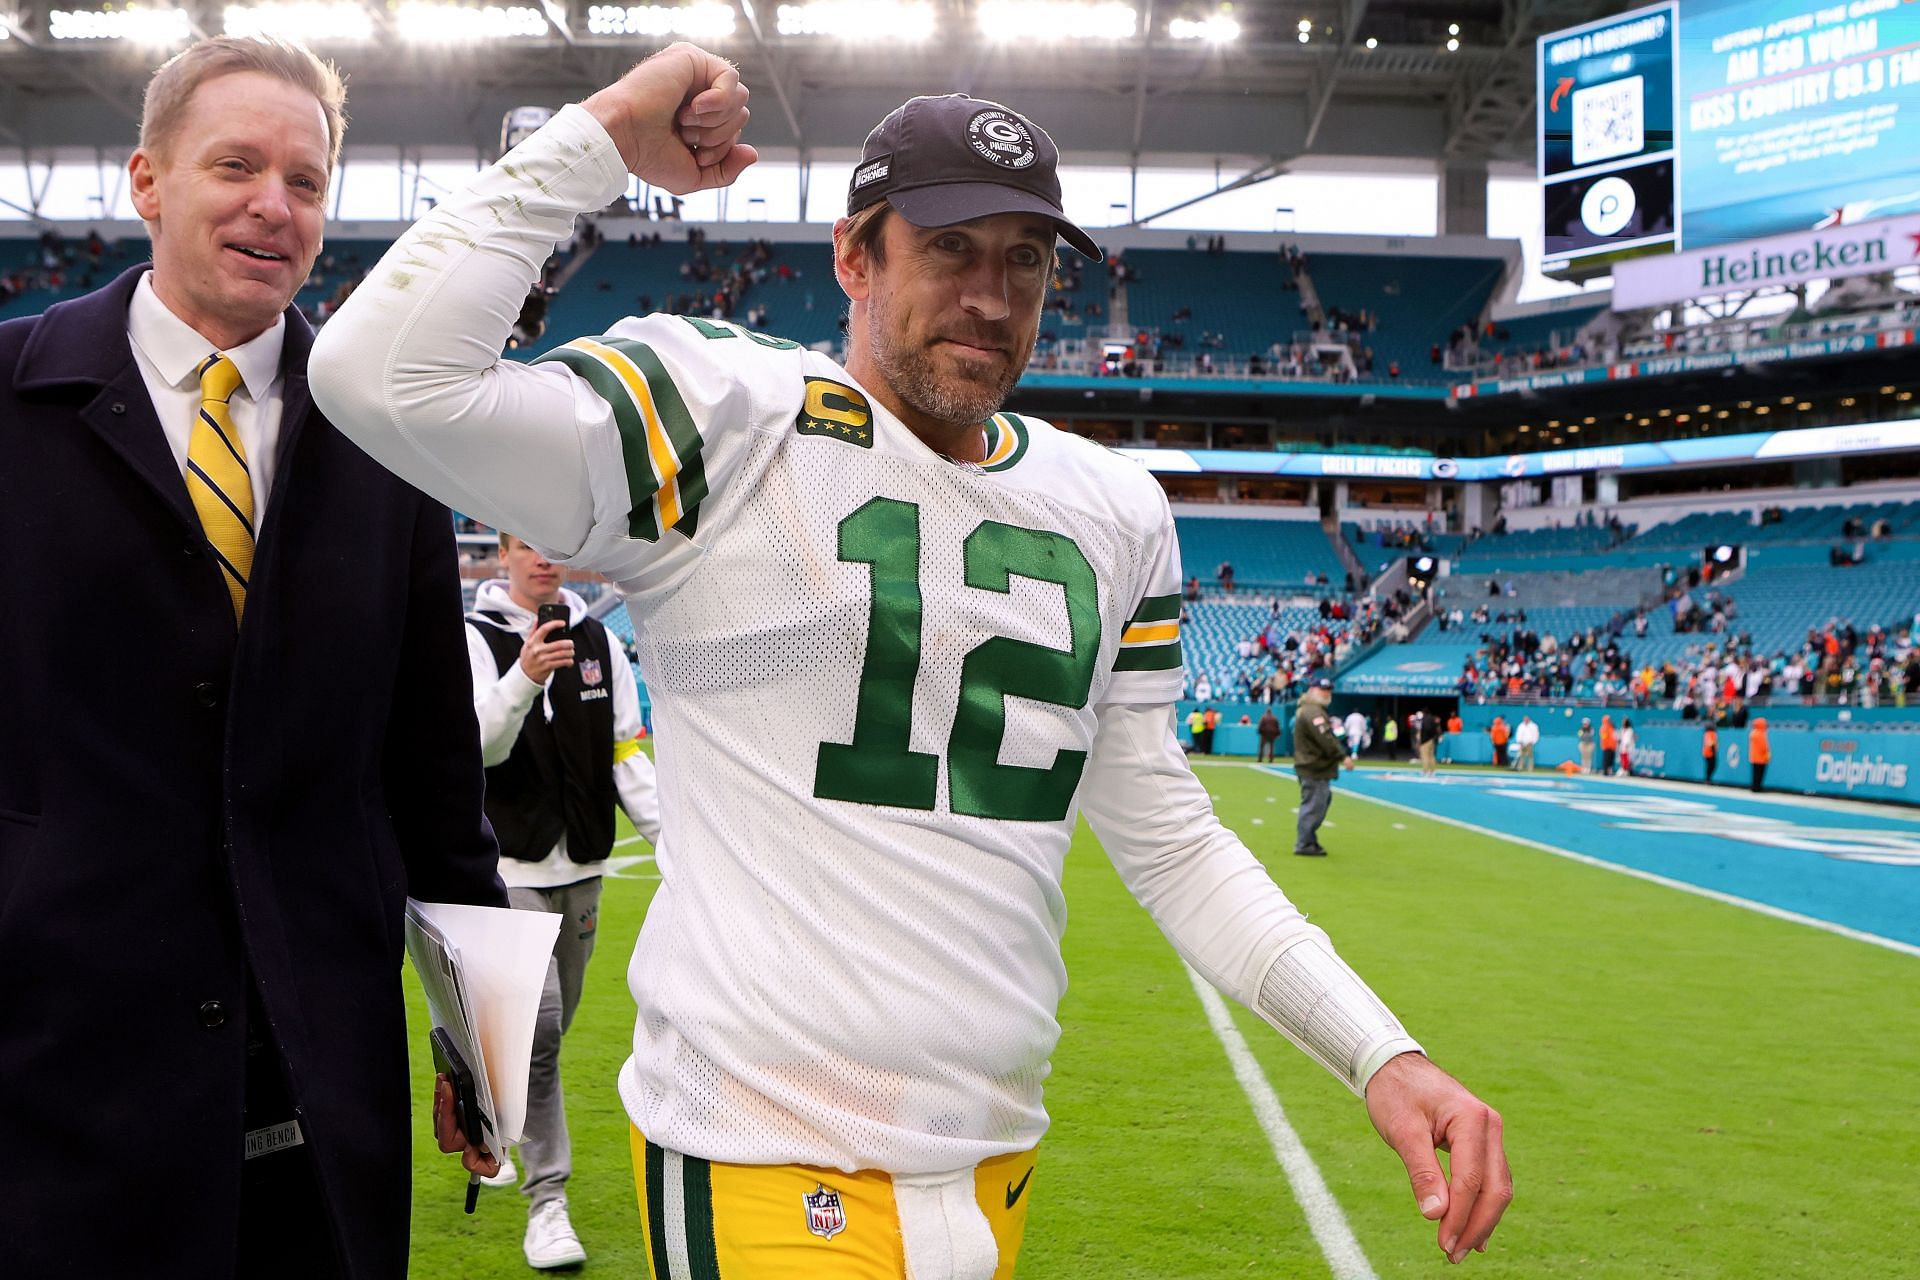 Aaron Rodgers admitted to ayahuasca use